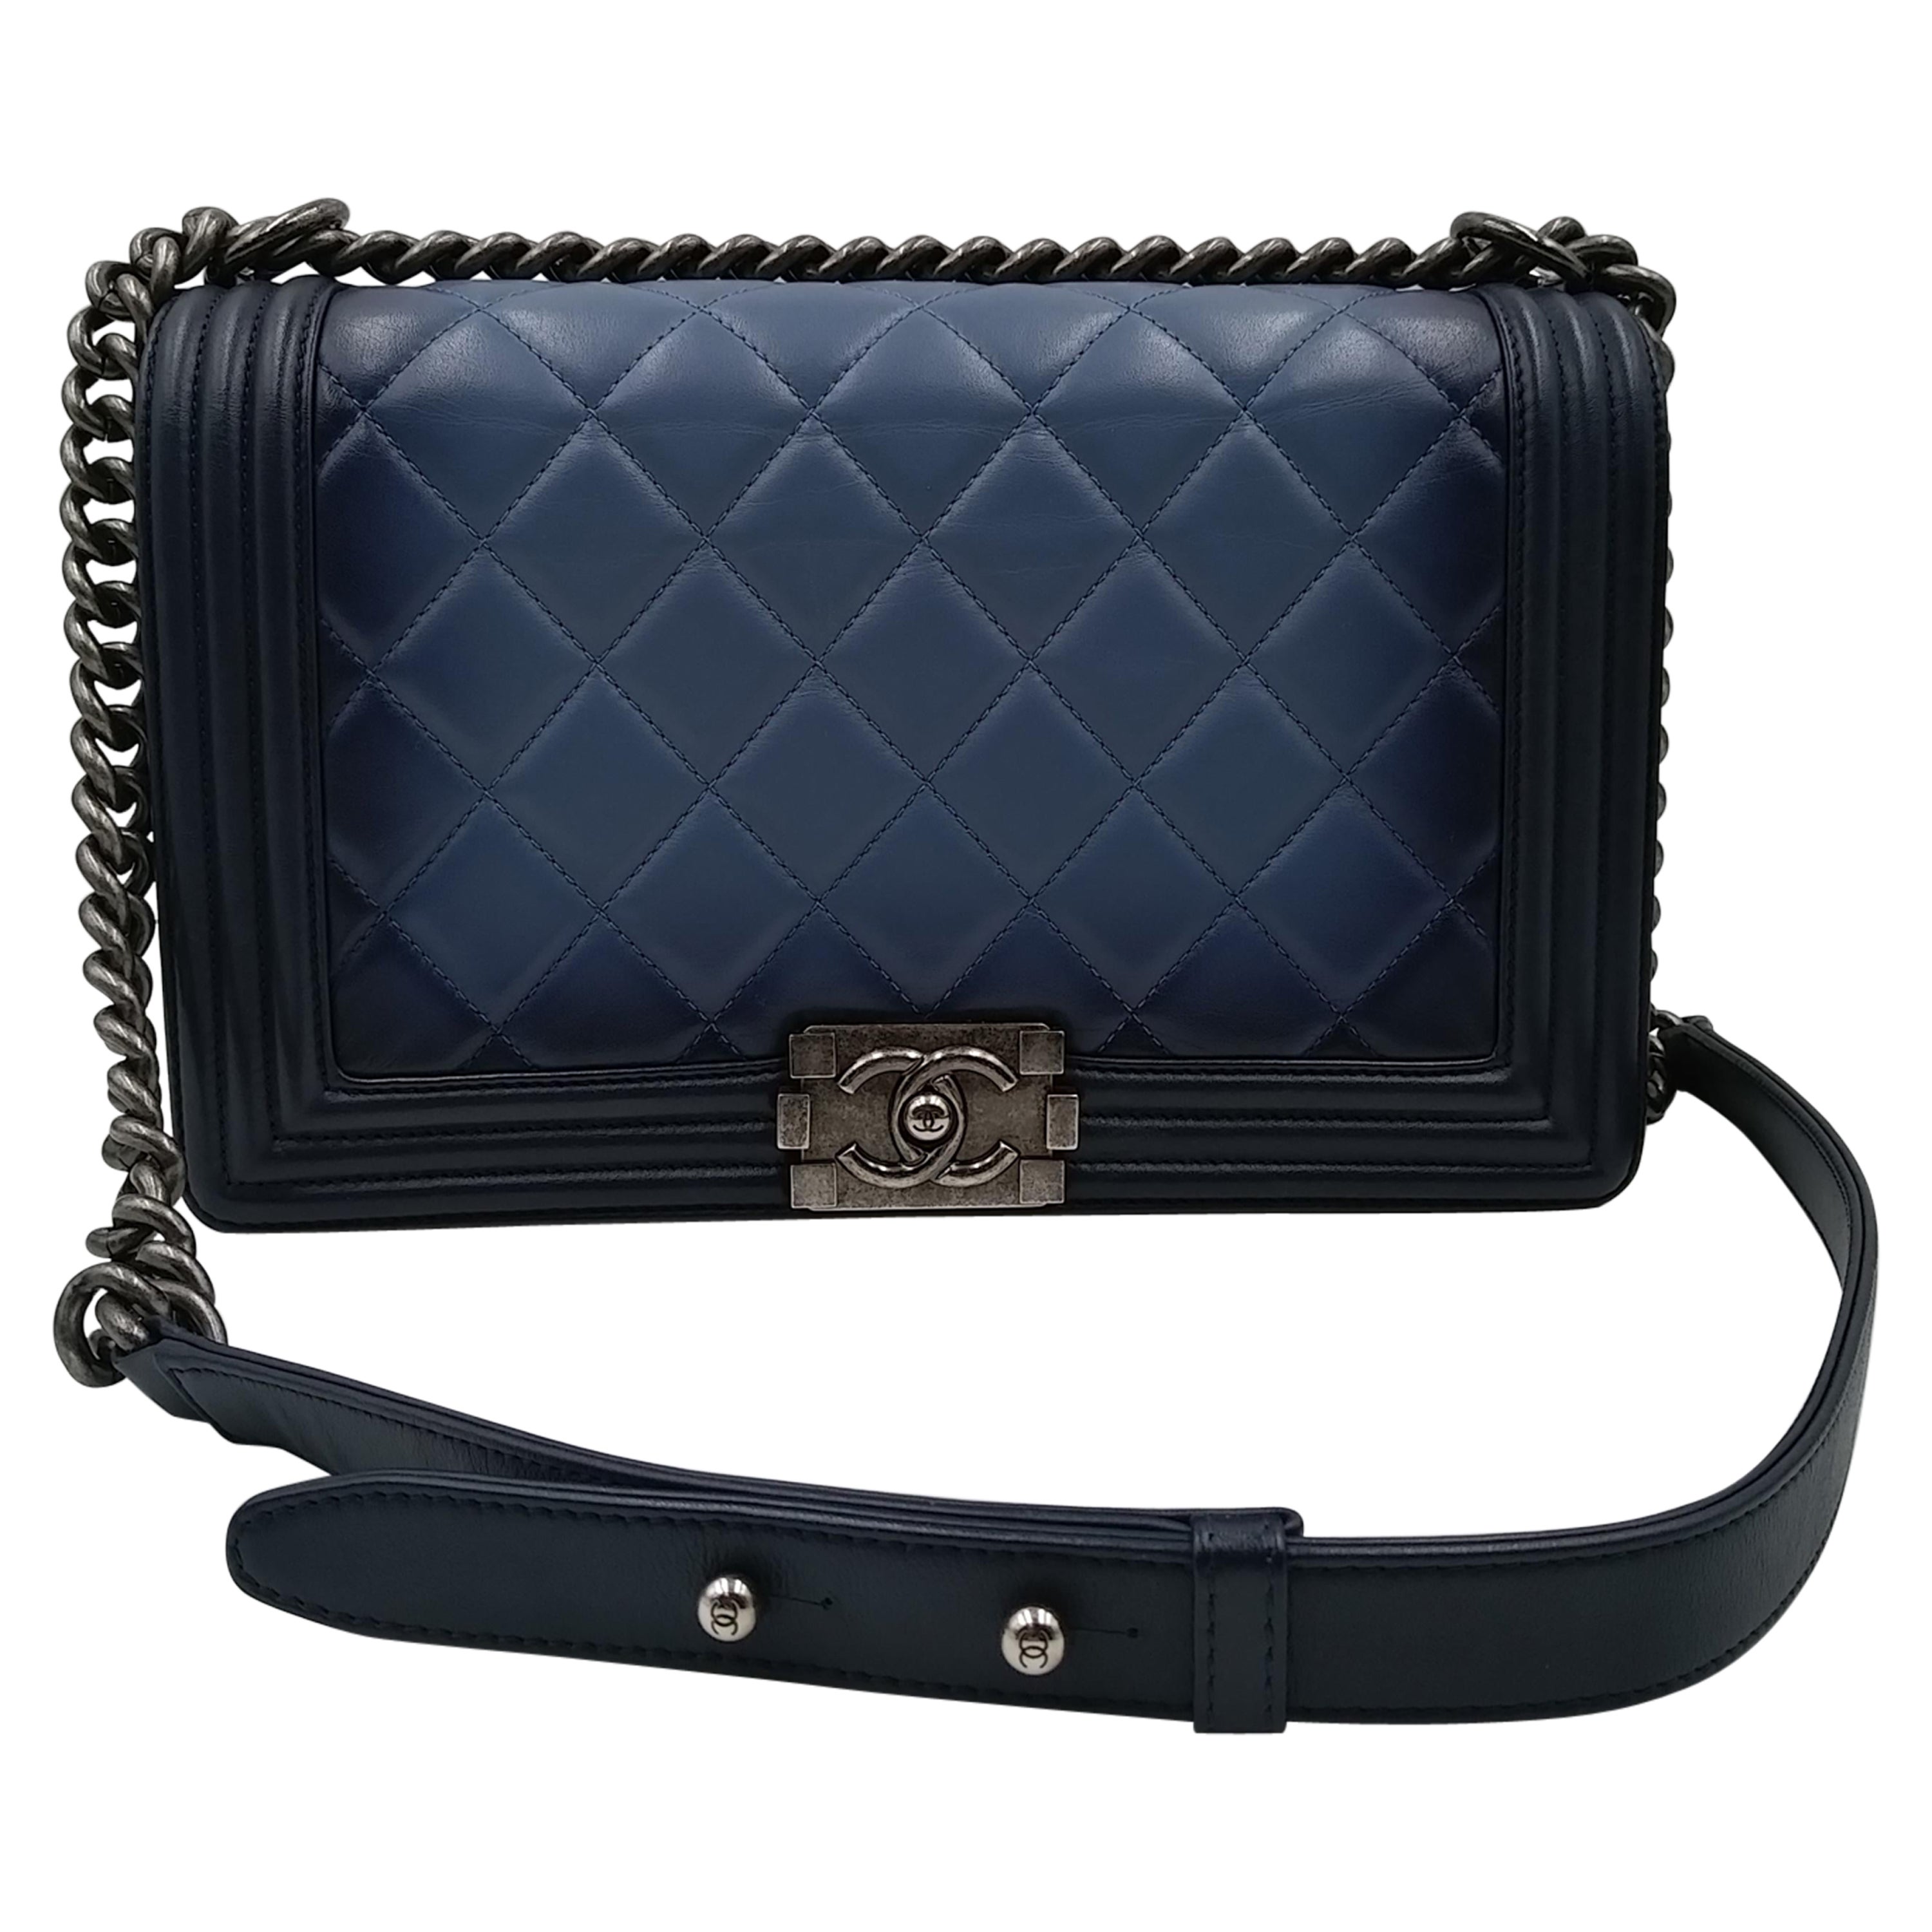 Chanel Blue Ombré Quilted Leather Boy Bag